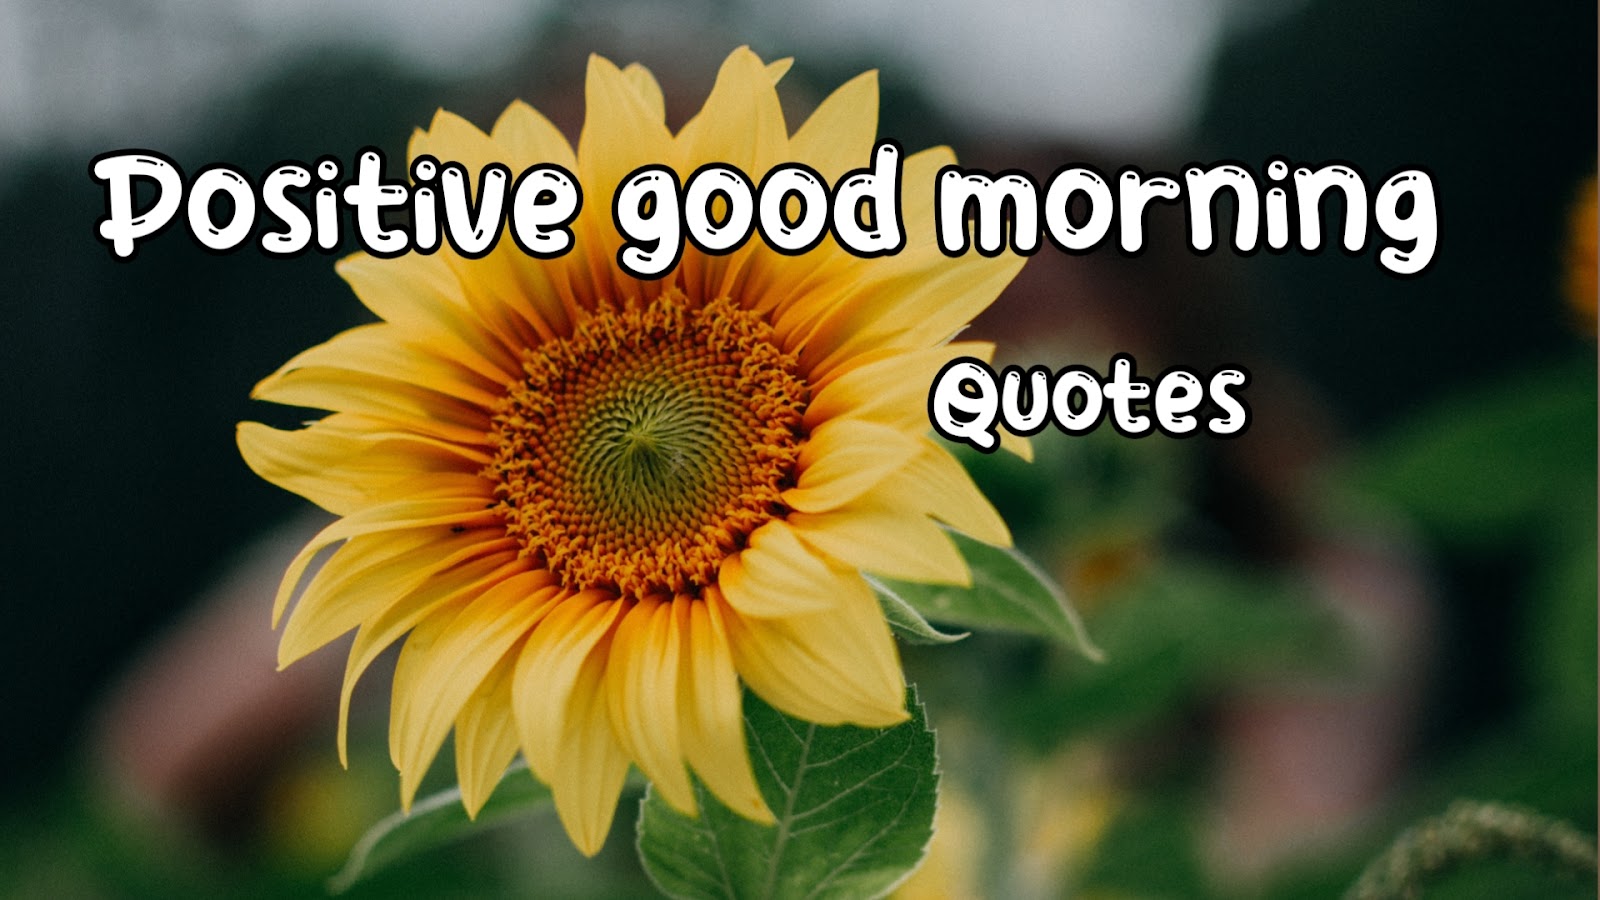 120 Positive good morning quotes, messages, wishes